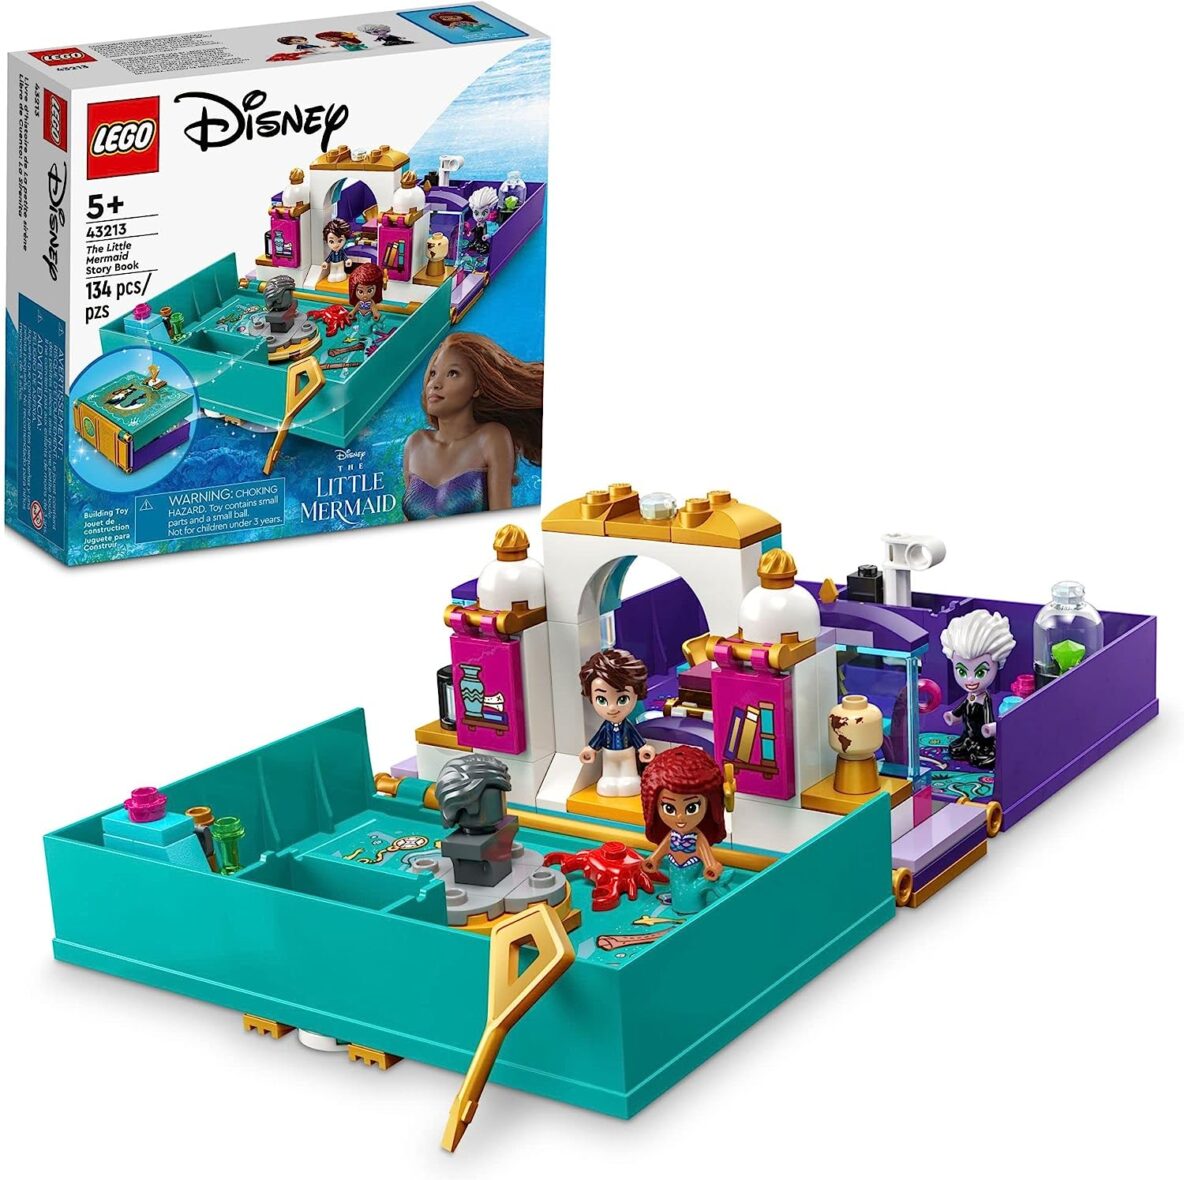 LEGO Disney The Little Mermaid Story Book 43213 Fun Playset with Ariel, Prince Eric, and Ursula Micro-Doll